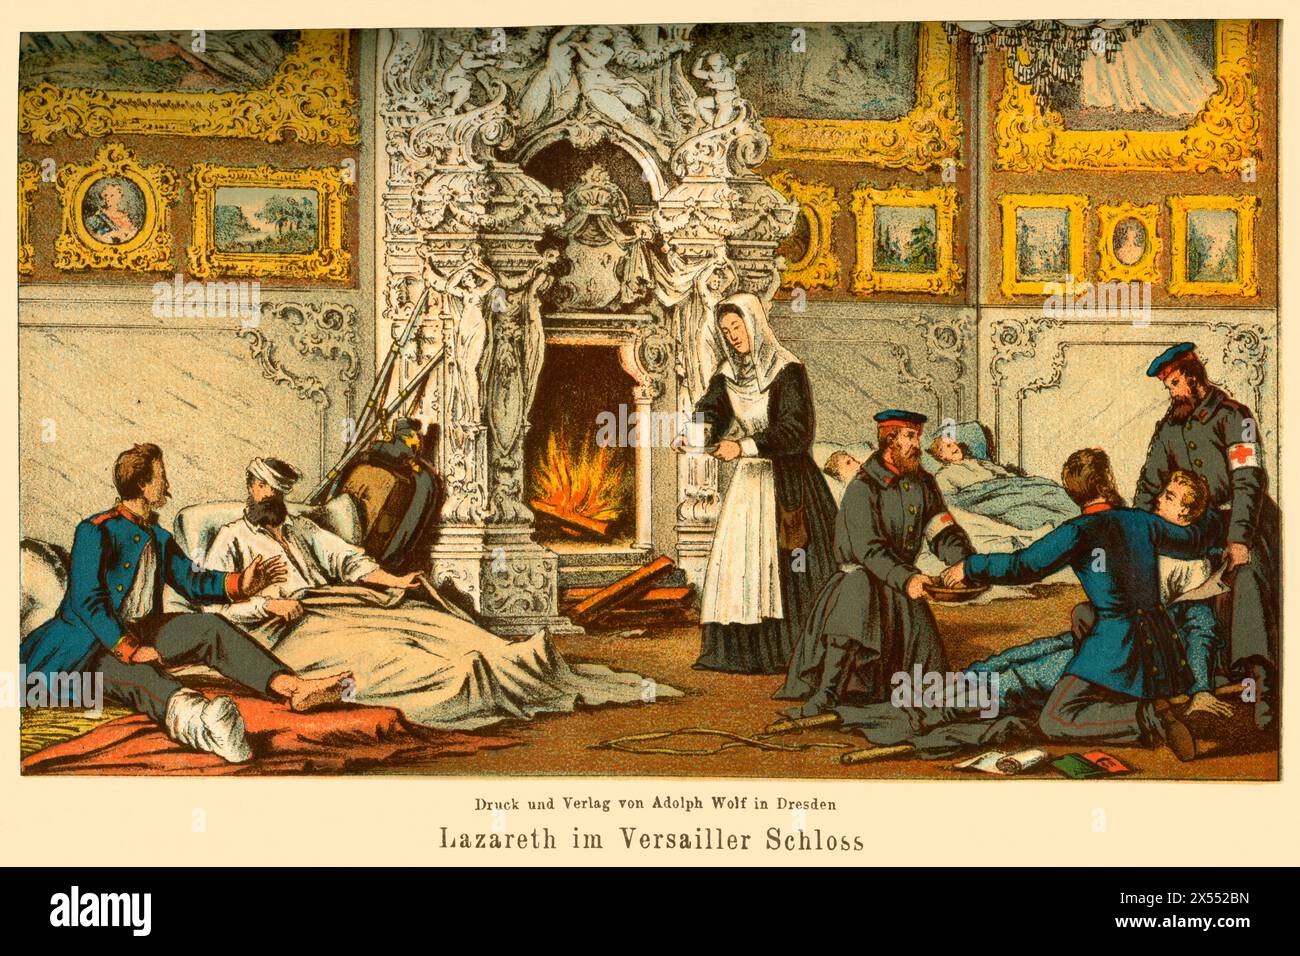 events, Franco-Prussion war, Versailles, 1870-1871, original text 'Military hospital in Versailles castle ', ARTIST'S COPYRIGHT HAS NOT TO BE CLEARED Stock Photo